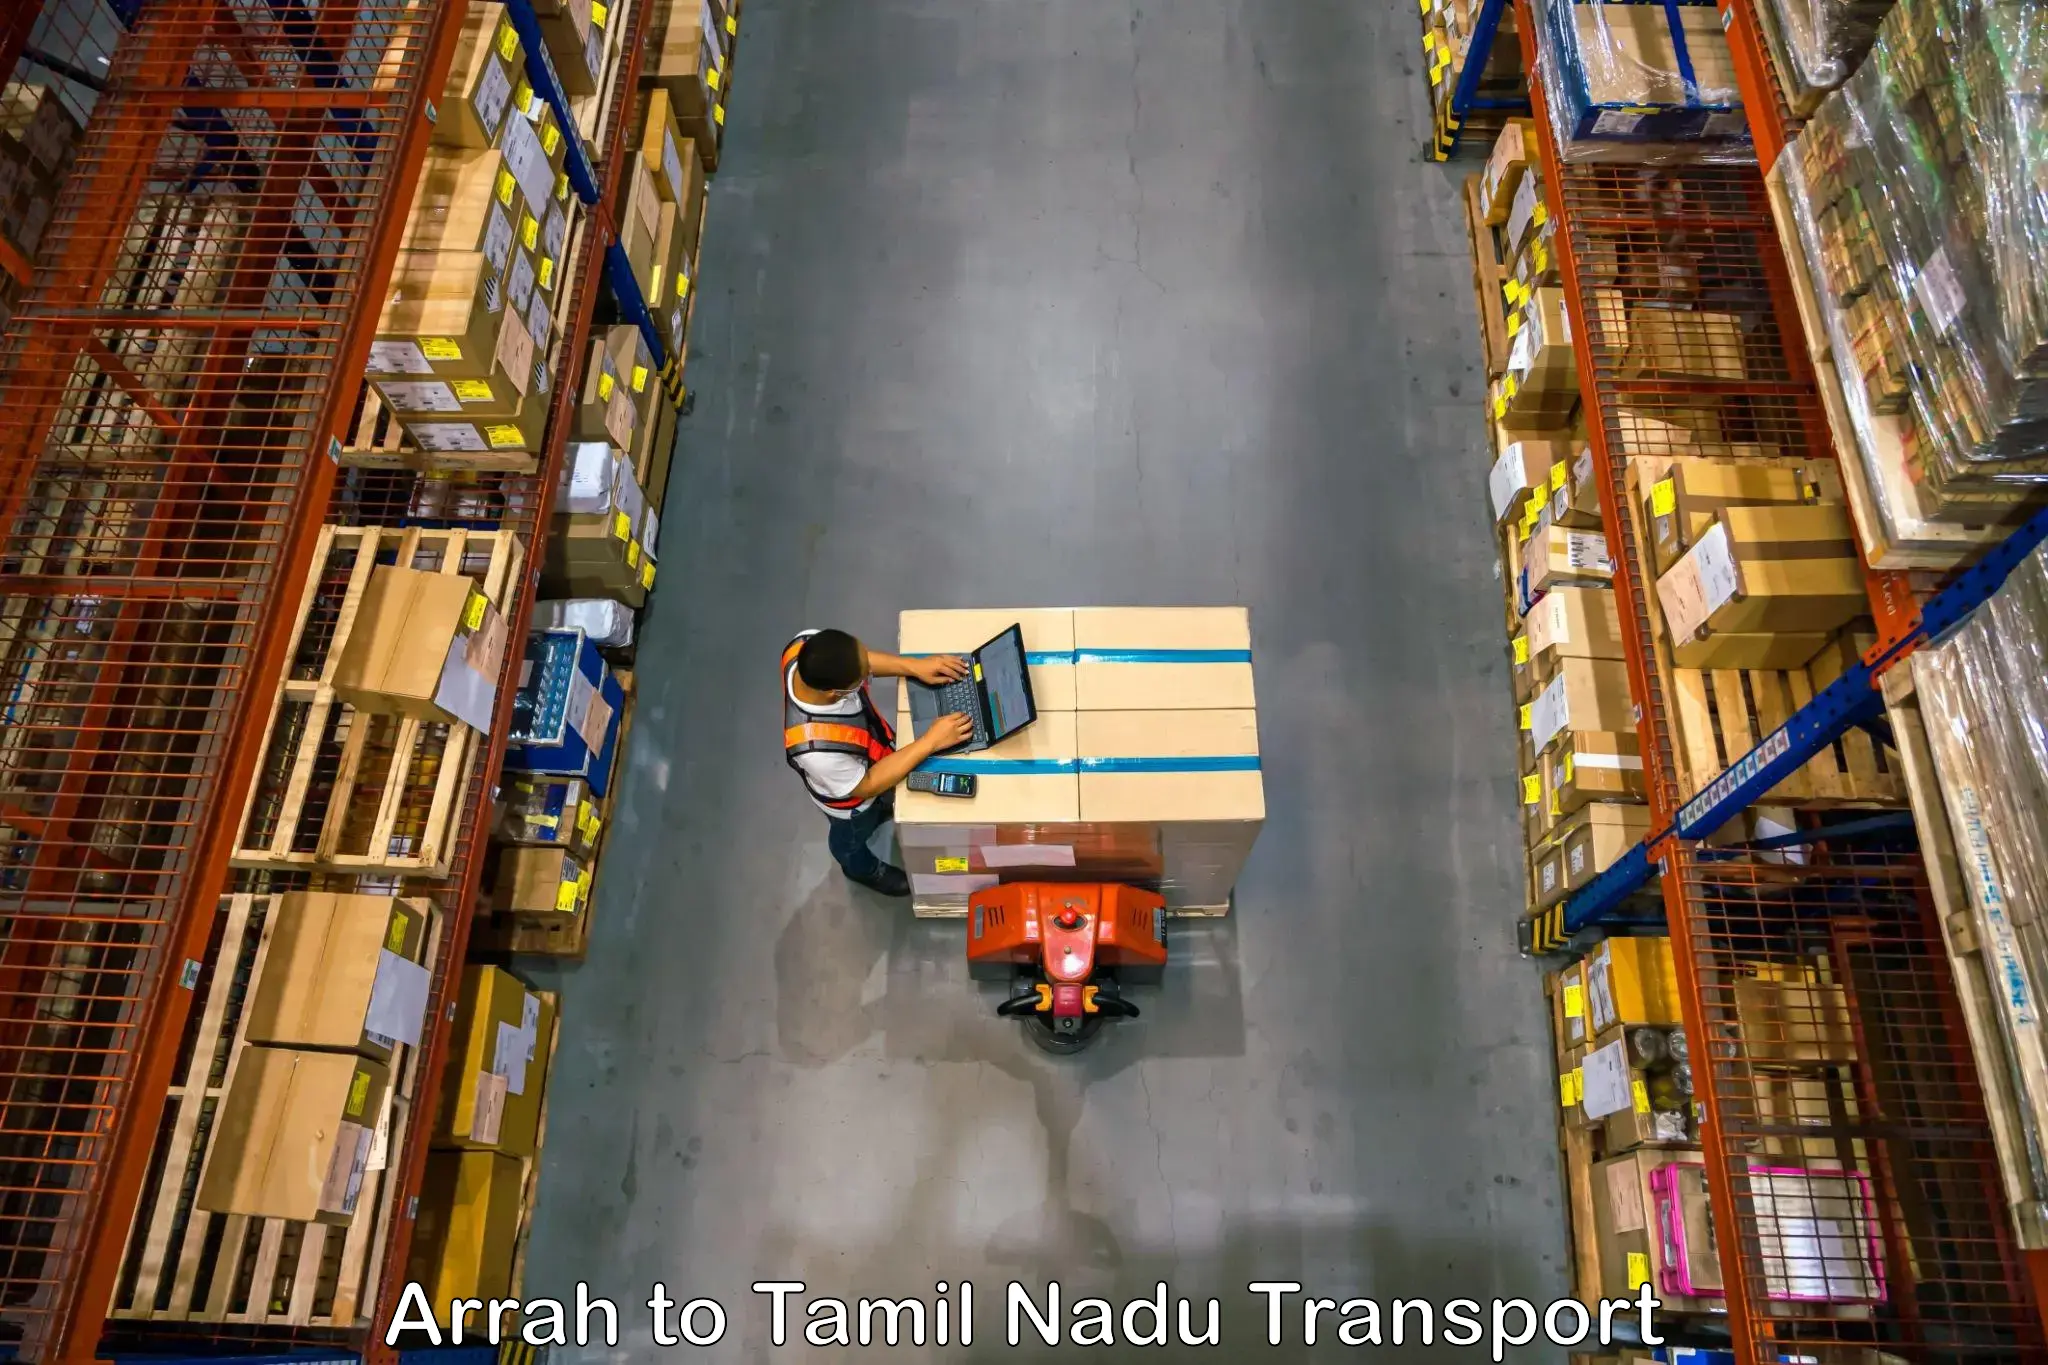 Transport shared services in Arrah to Trichy